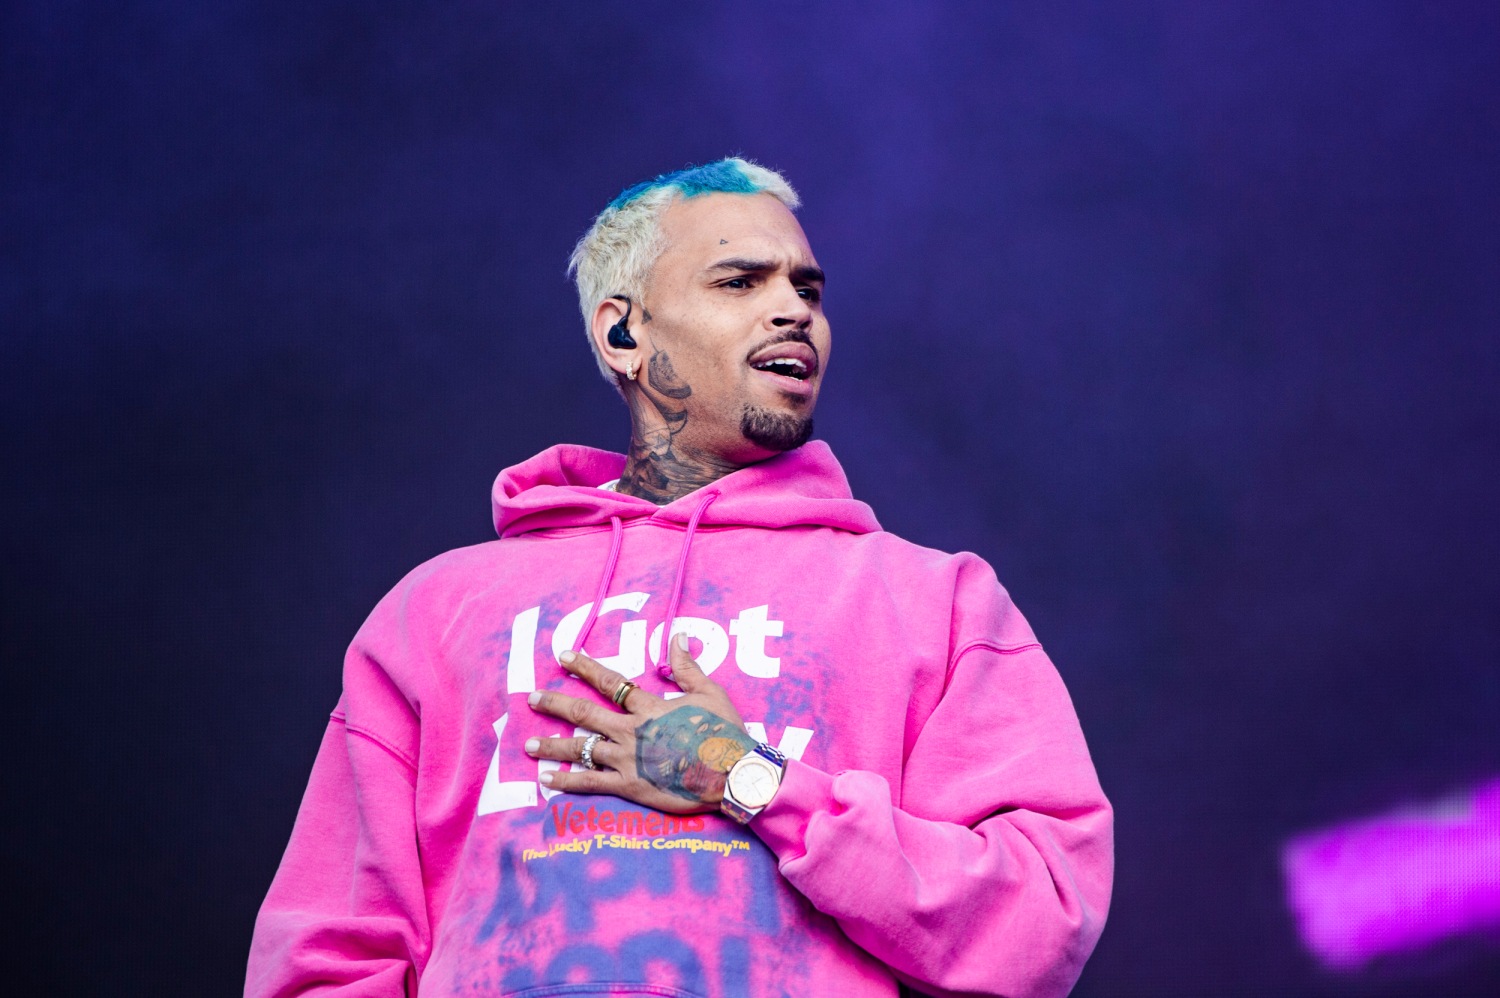 Chris Brown responds to criticism over viral fan photos